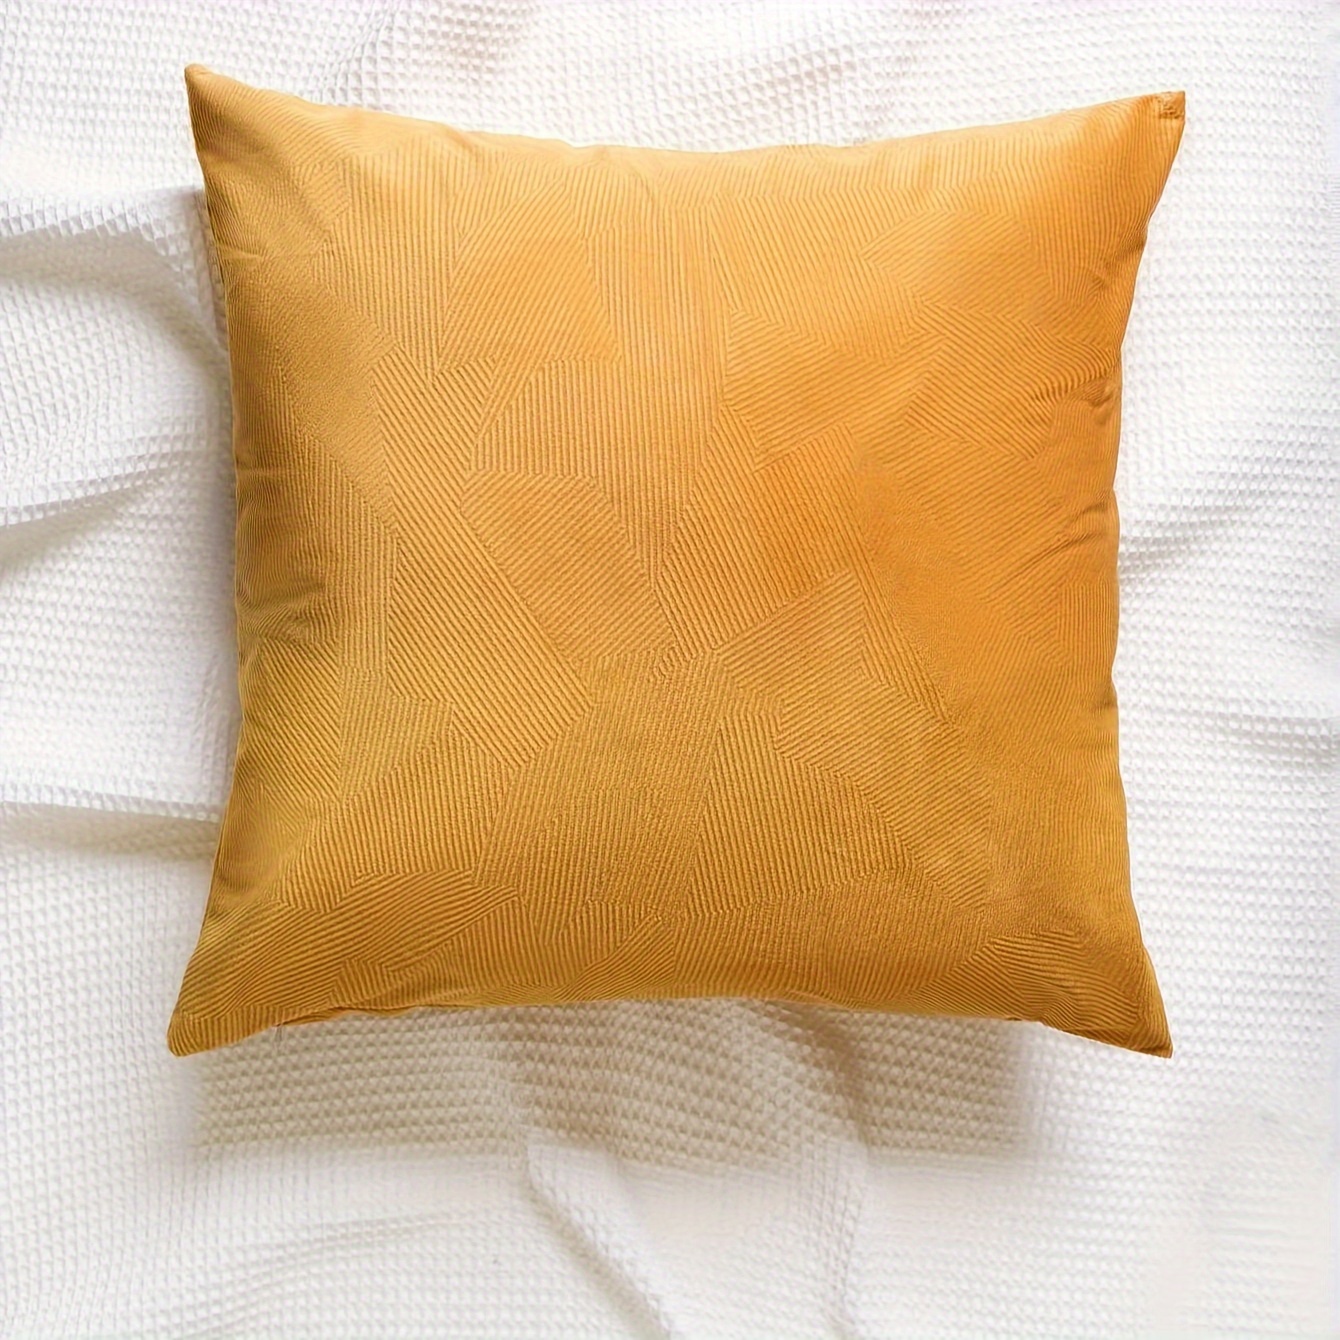 

1pc Contemporary Style Velvet Textured Throw Pillow Cover, 18x18 Inches, Mustard Yellow With Line Pattern, Zippered Cushion Case For Sofa & Bed Decor